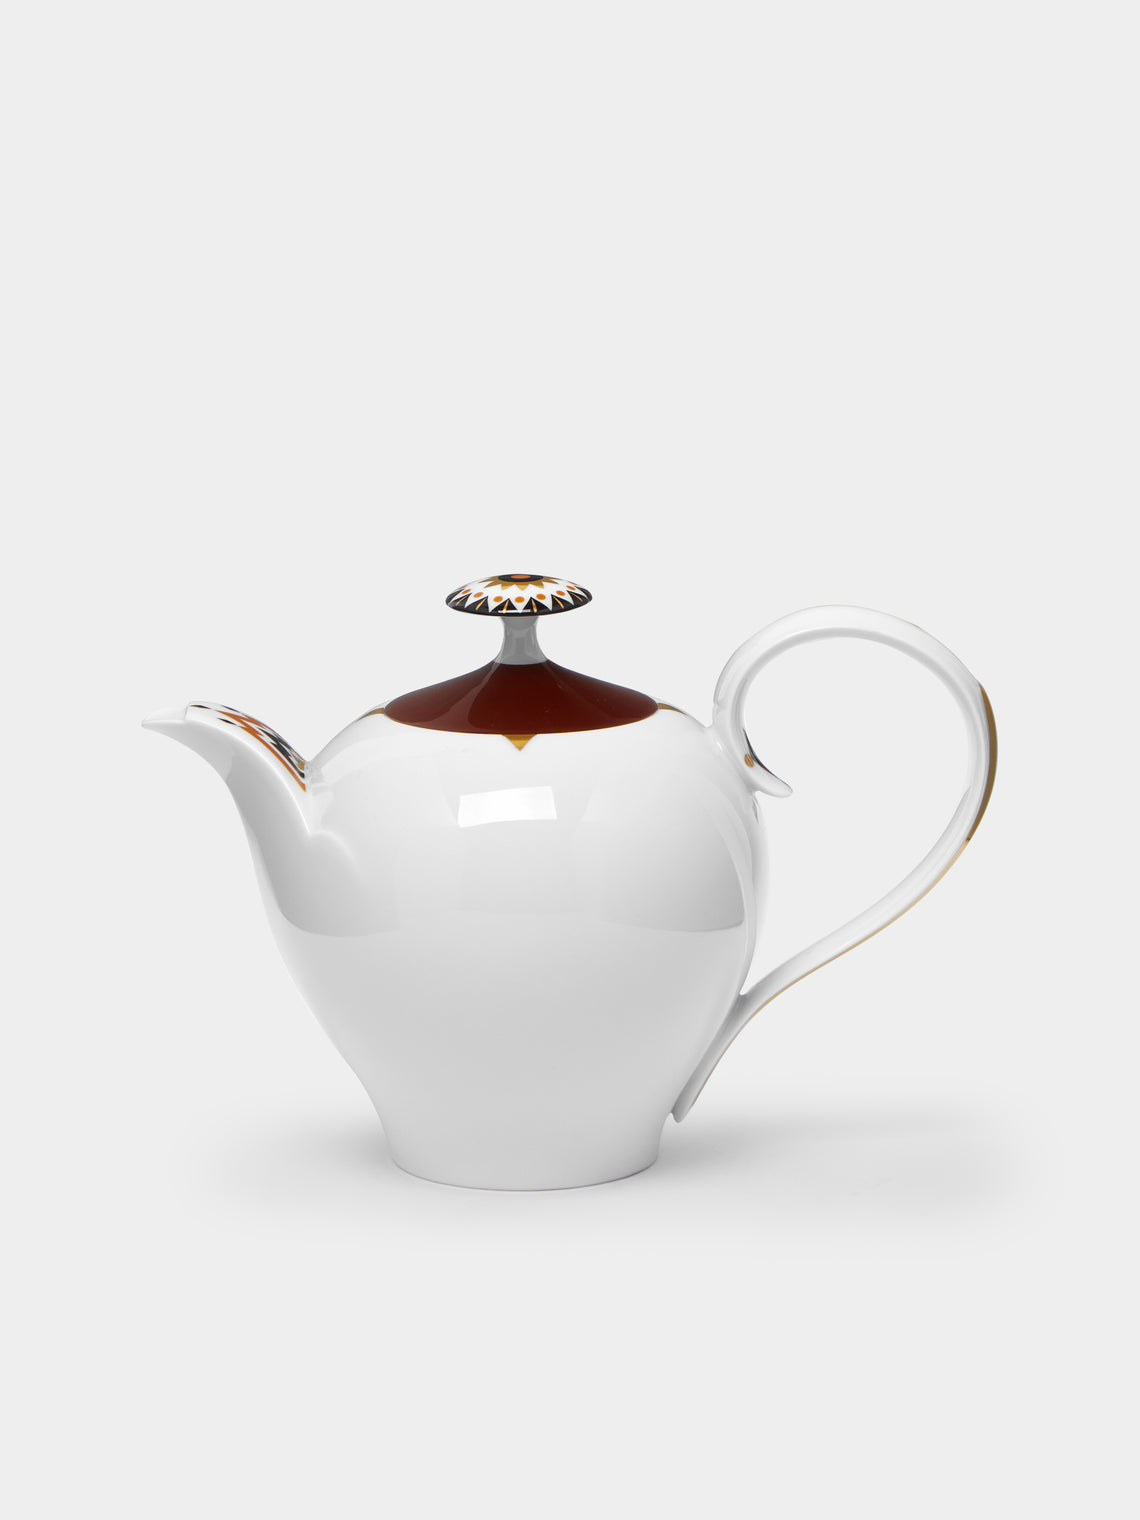 Augarten - Ena Rottenberg Hand-Painted Porcelain Coffee Pot -  - ABASK - 